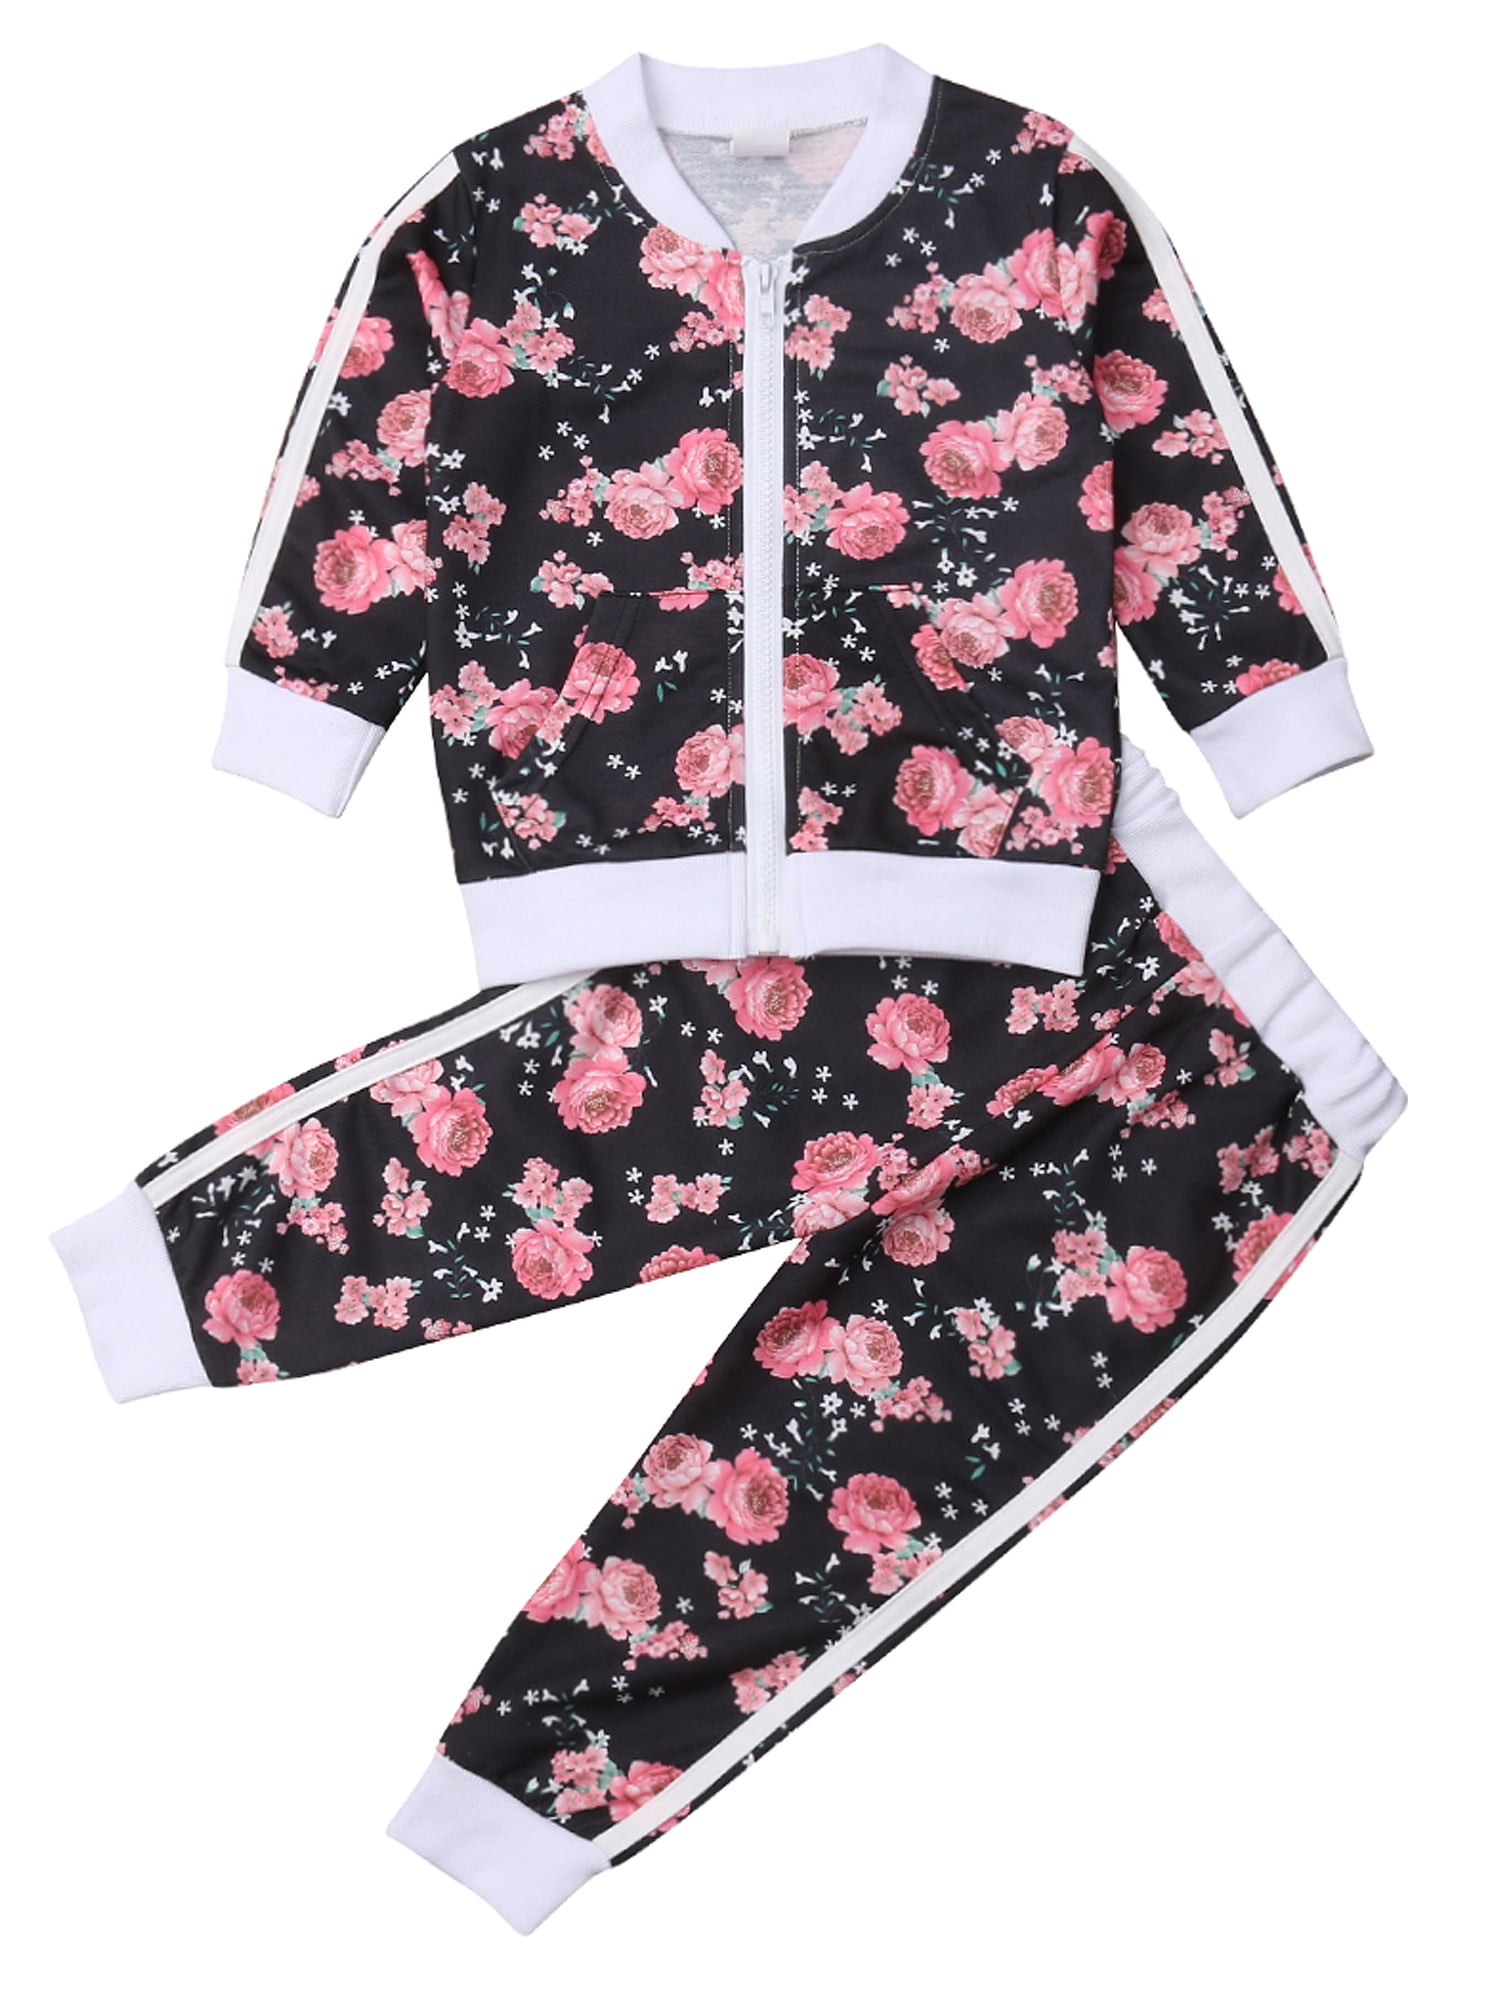 Pants Tracksuit Outfits Set puseky Kid Baby Girls Floral Long Sleeve Hoodie Shirt Top